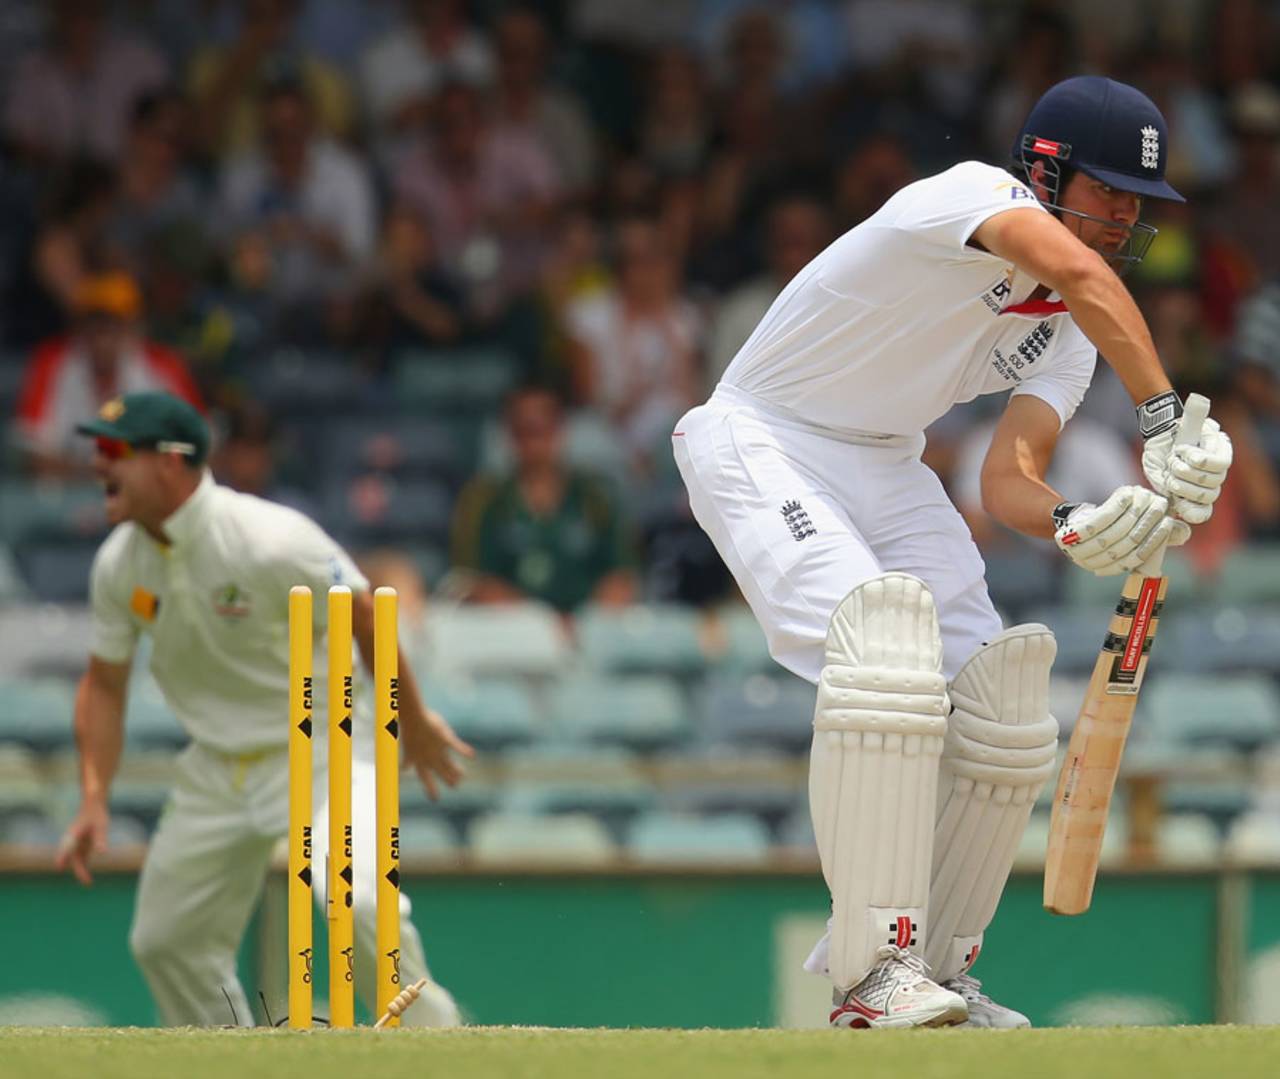 Alastair Cook was bowled by Ryan Harris off the first ball of the innings, Australia v England, Test, Perth, 4th day, December 16, 2013